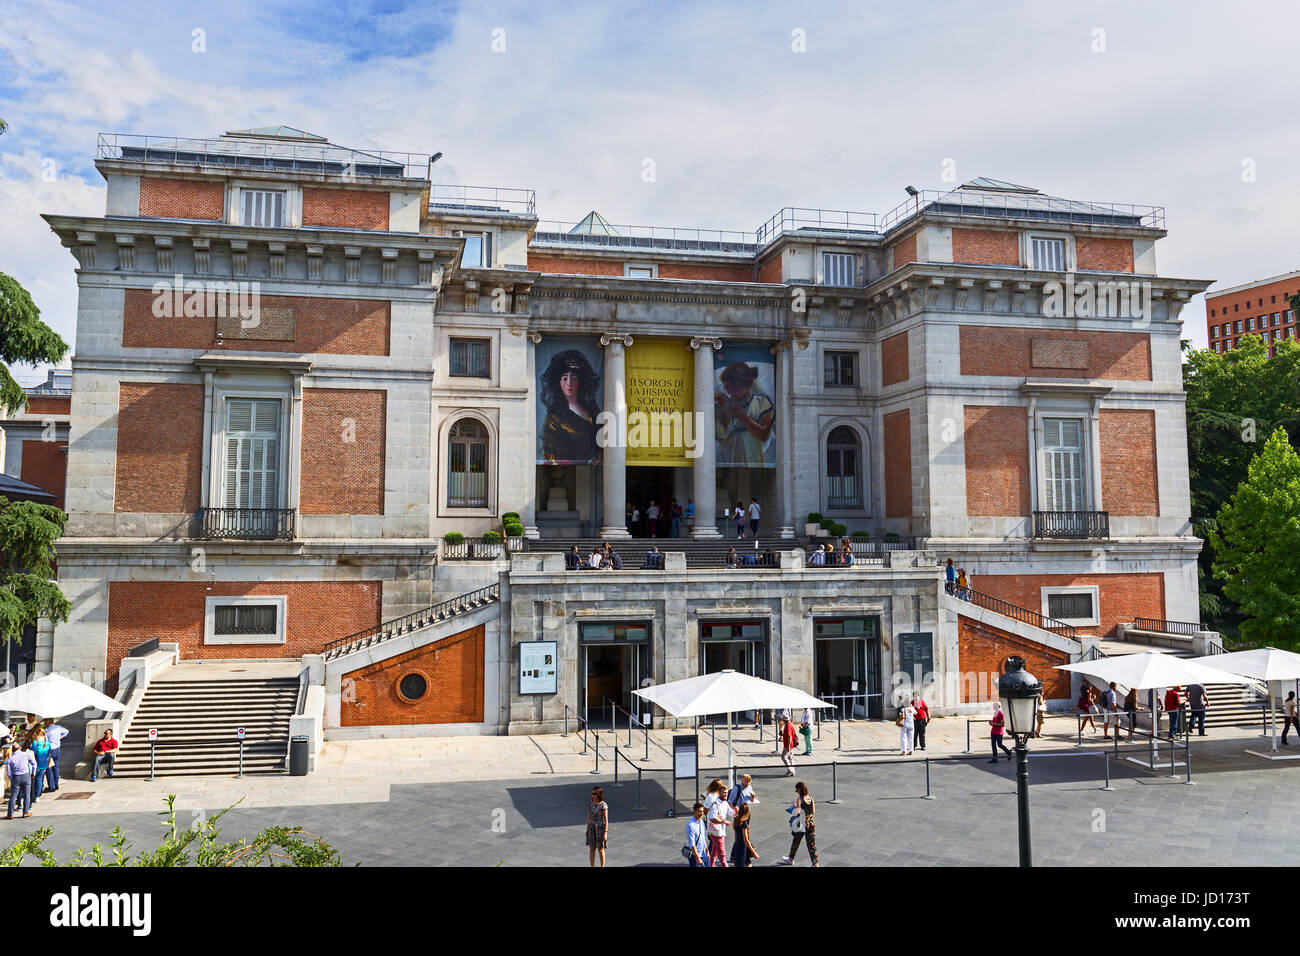 MADRID; SPAIN JUNE 4: The Prado Museum is considered the best collection of Spanish art and one of the world's finest collections of European art. Jun Stock Photo